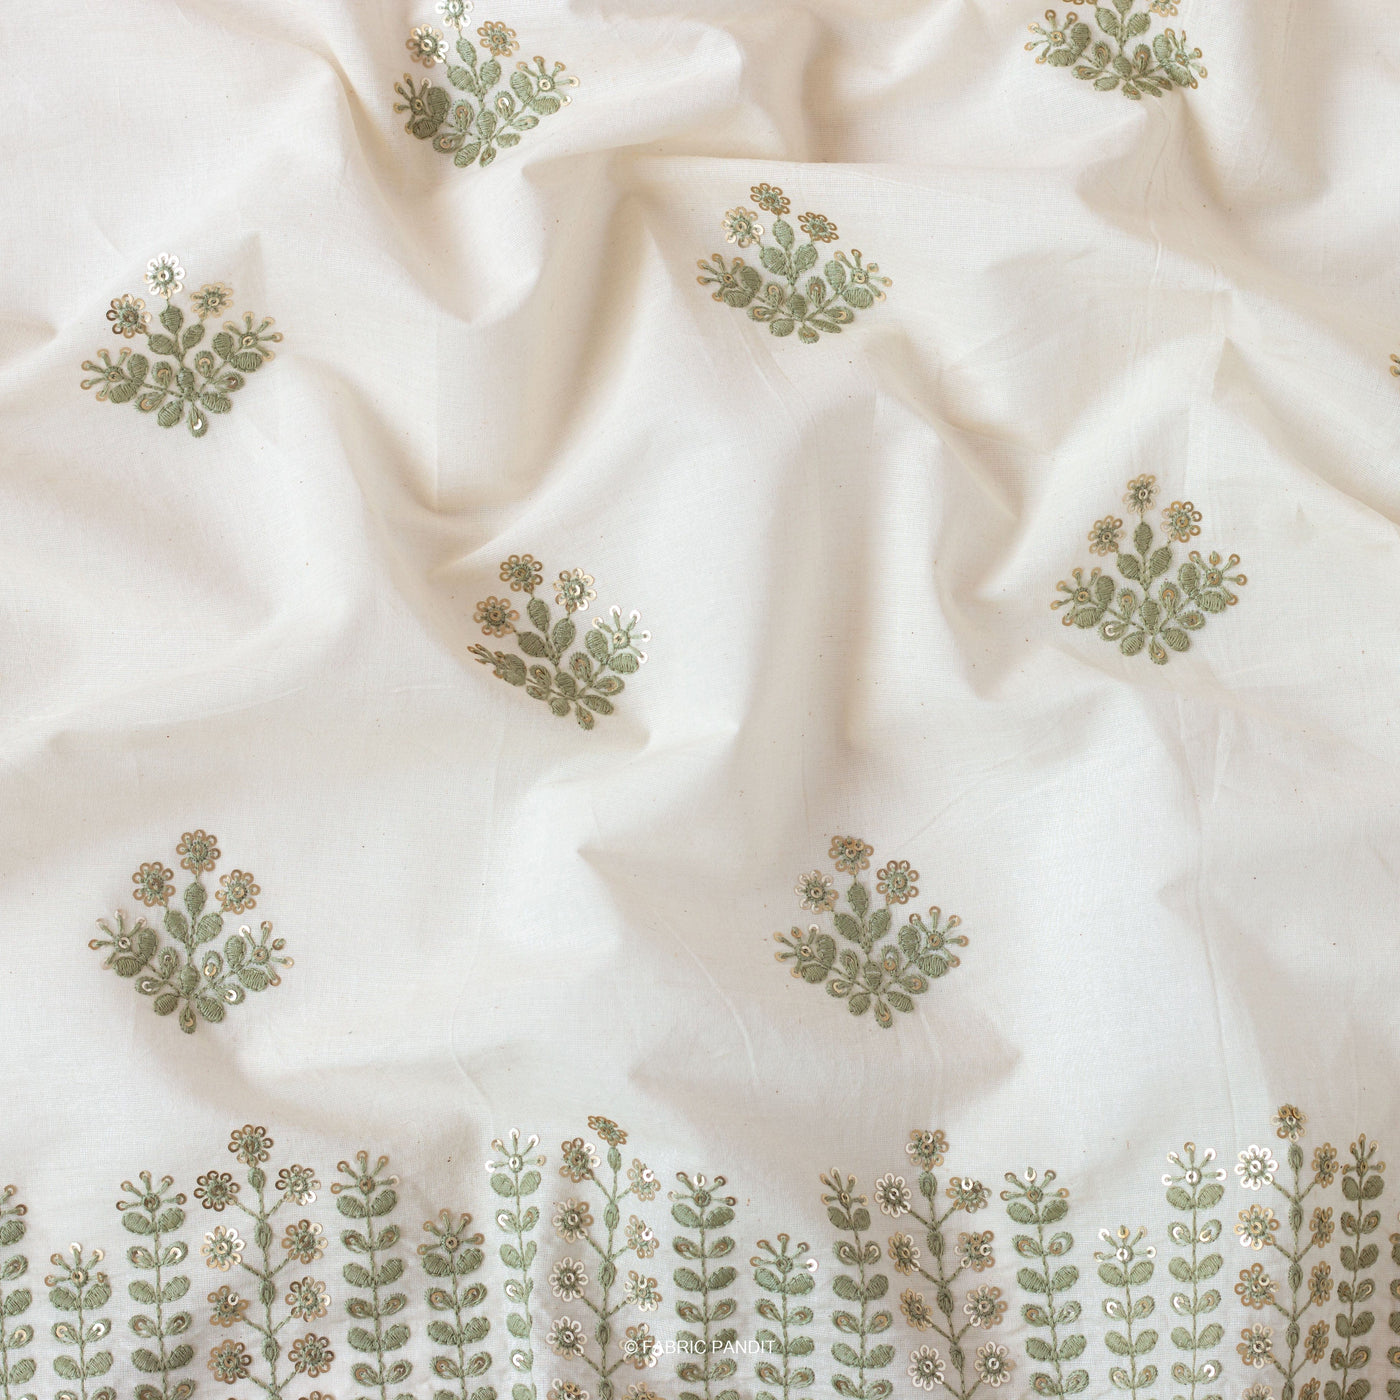 Fabric Pandit Fabric White & Light Green Embroidered Flower Garden Pure Cotton Fabric (Width 46 inches)